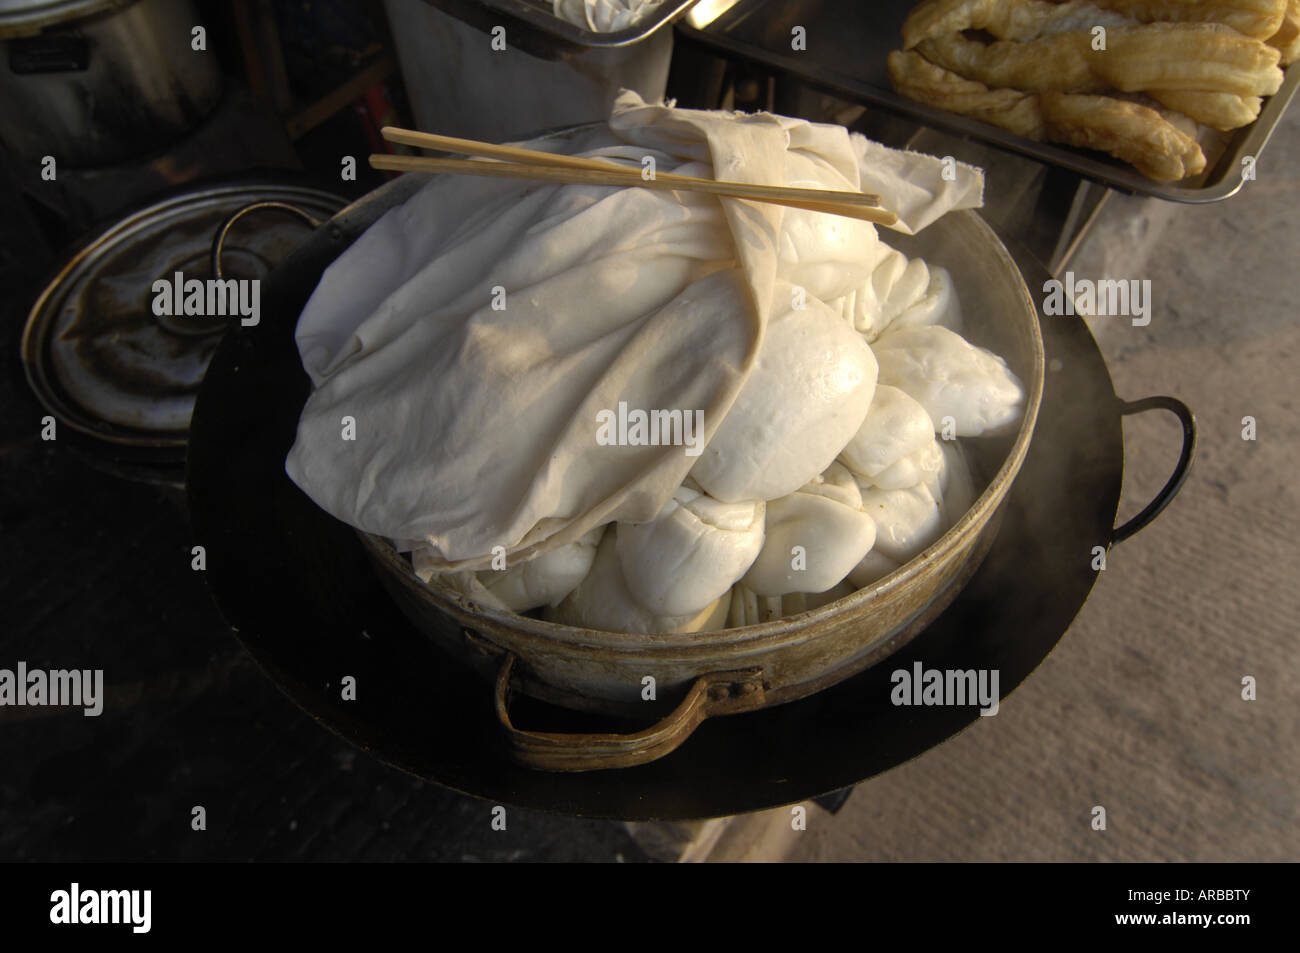 Handel, China, Fengdu, Handel, Street Food, Additional-Rights - Clearance-Info - Not-Available Stockfoto